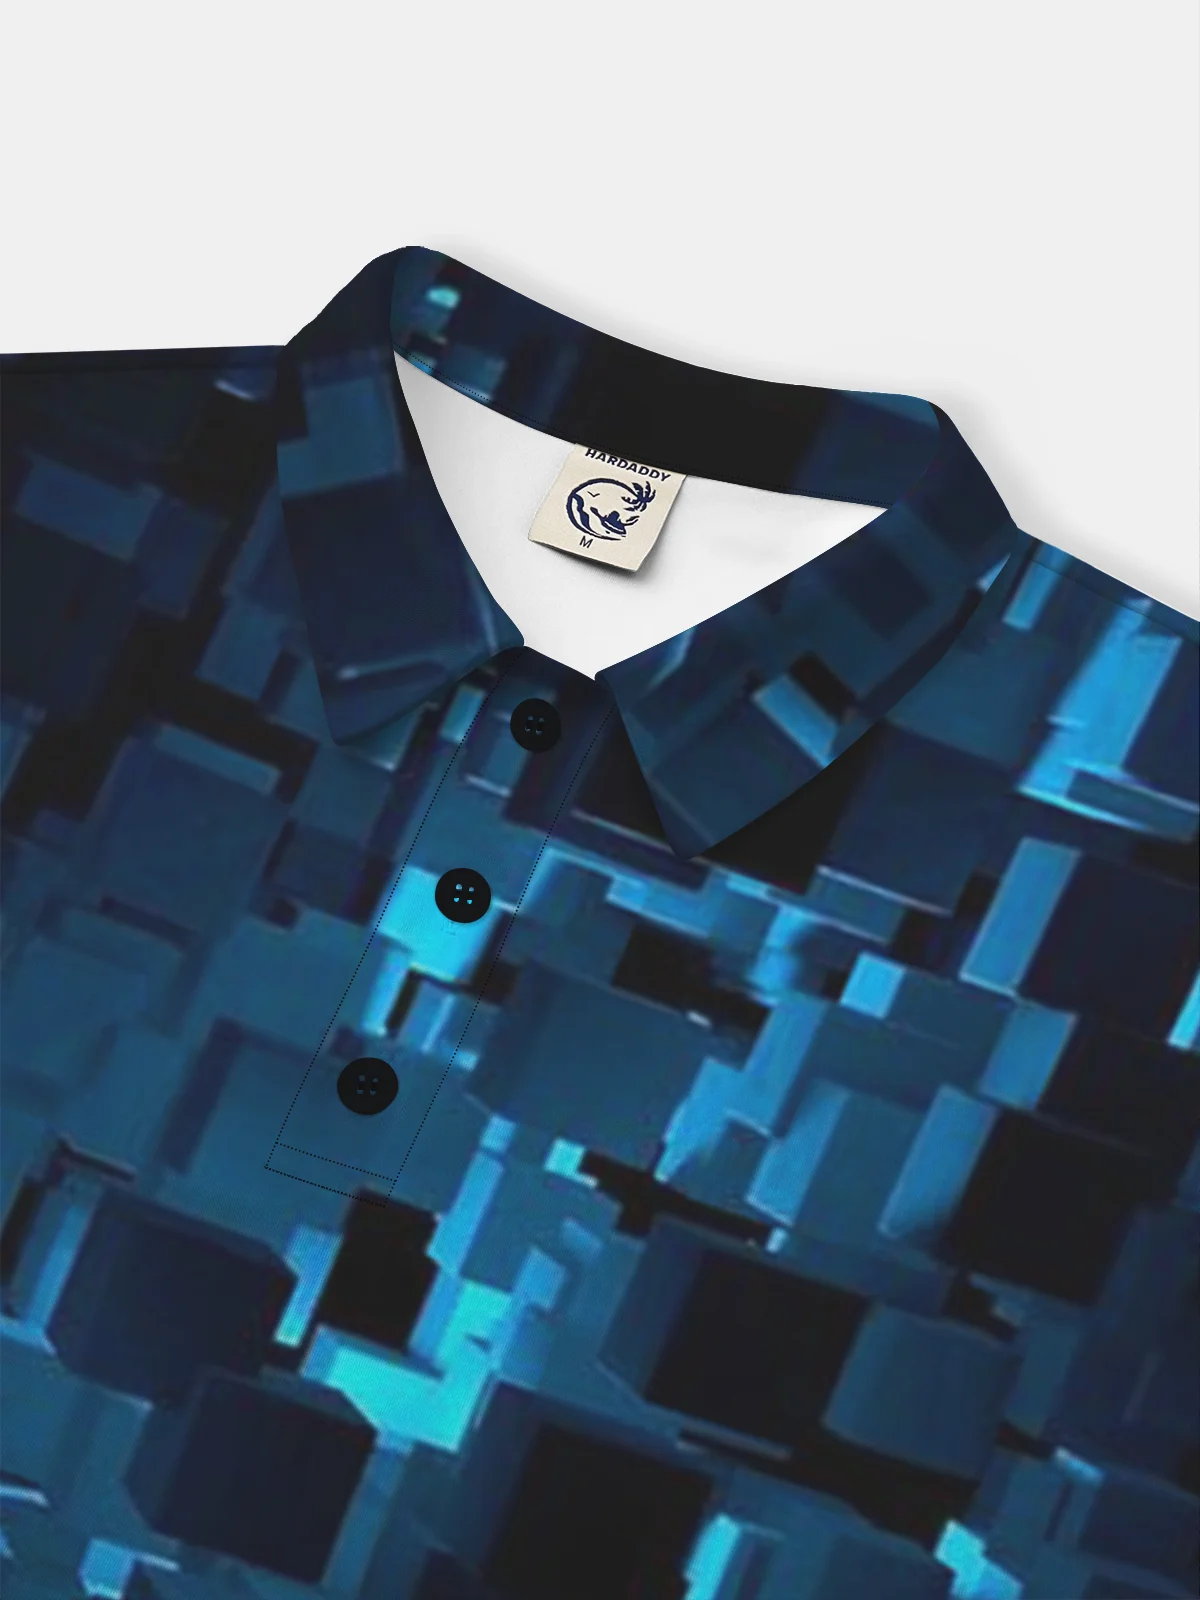 Moisture Wicking Golf Polo 3D Gradient Abstract Geometric